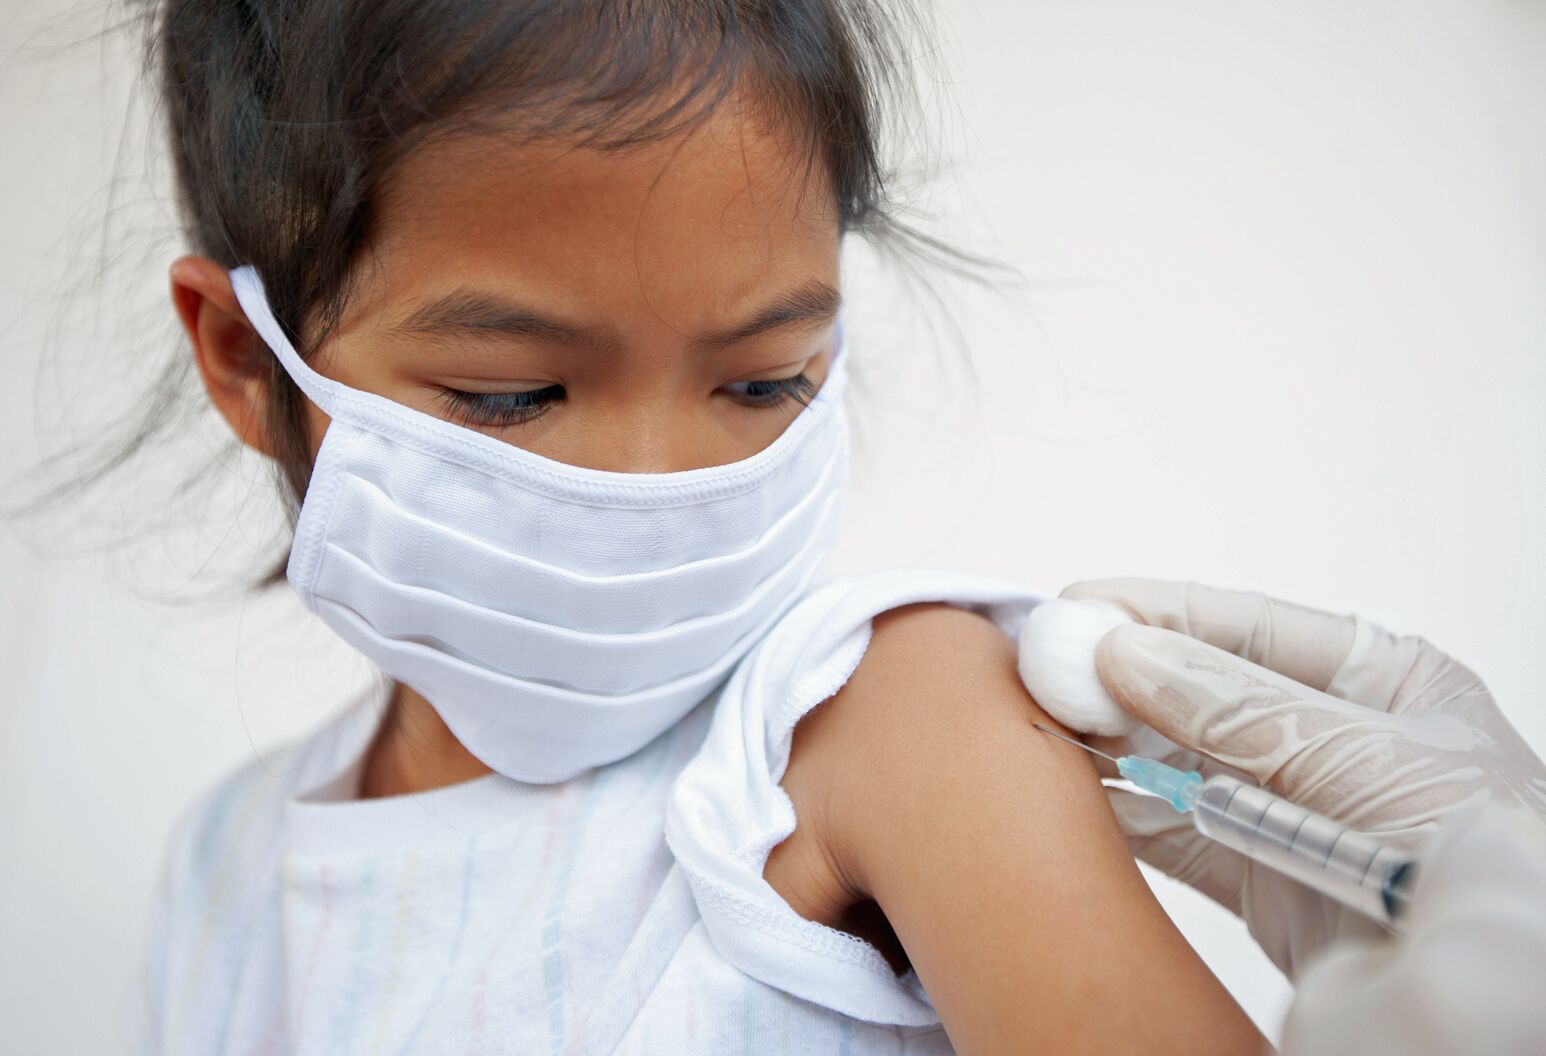 Covid Jab All You Need to Know About Your kids Getting Vaccinated 11 key Questions!